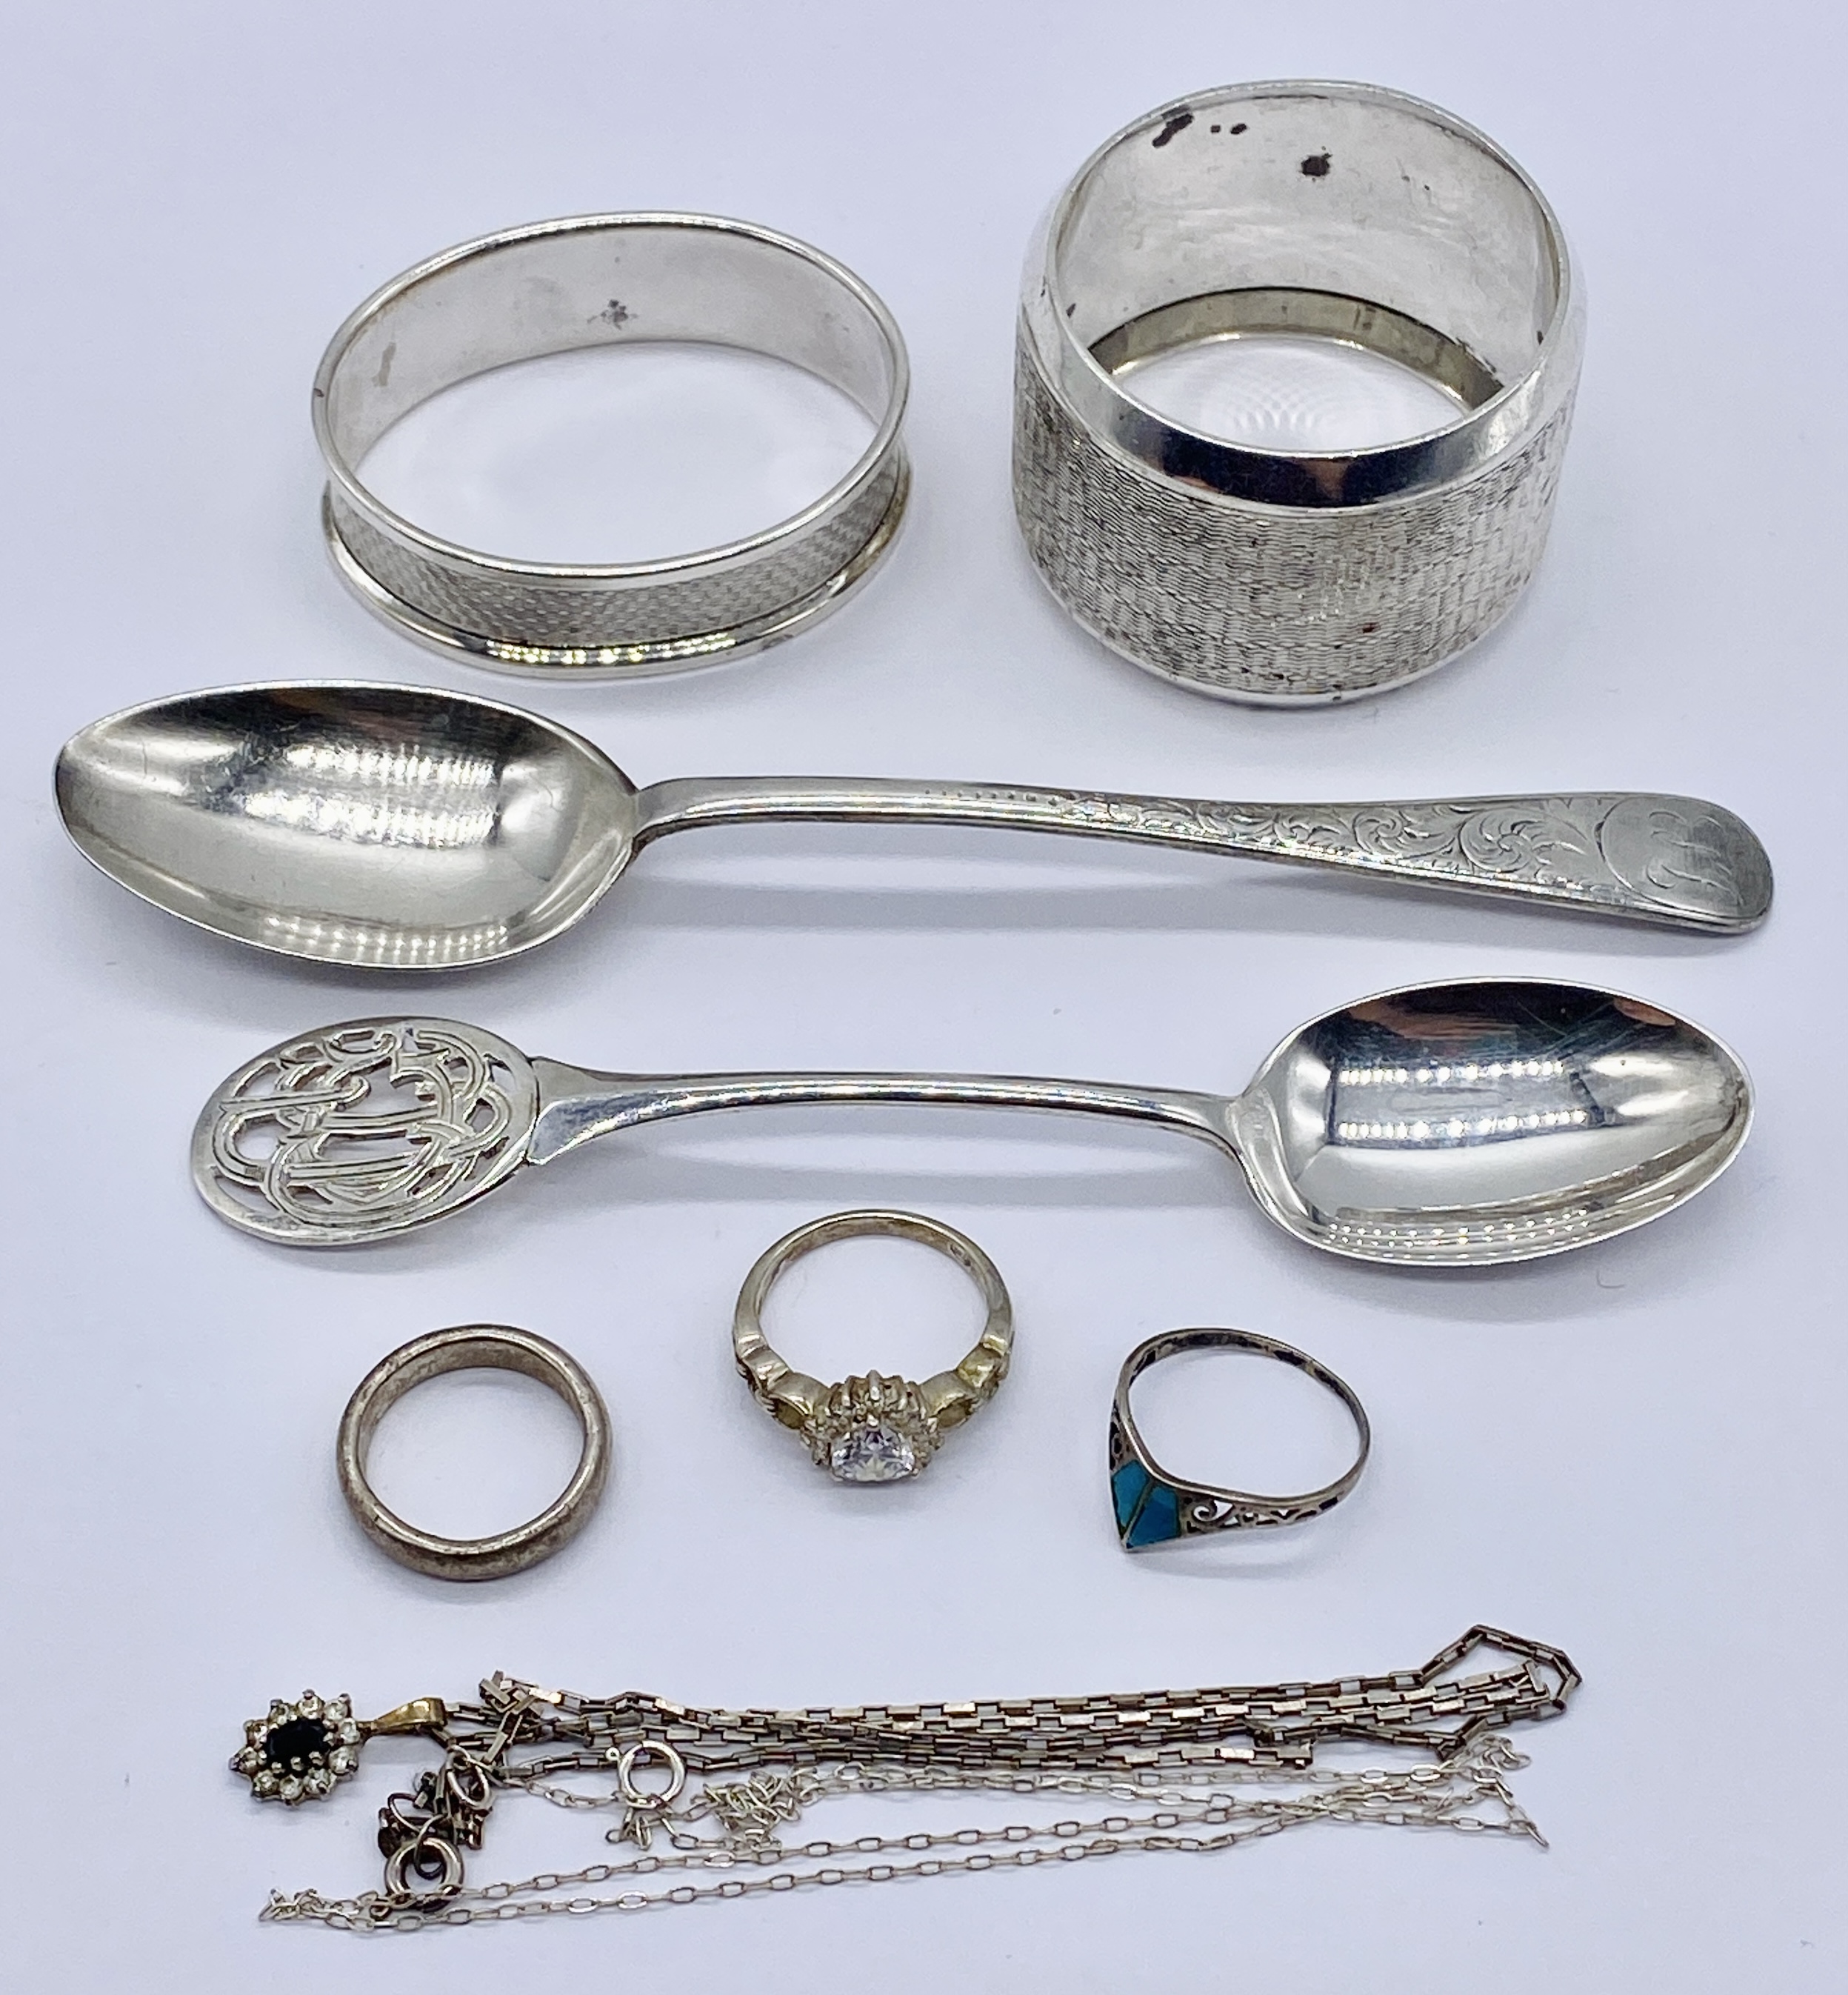 A small quantity of hallmarked silver items including jewellery, spoons and serviette rings